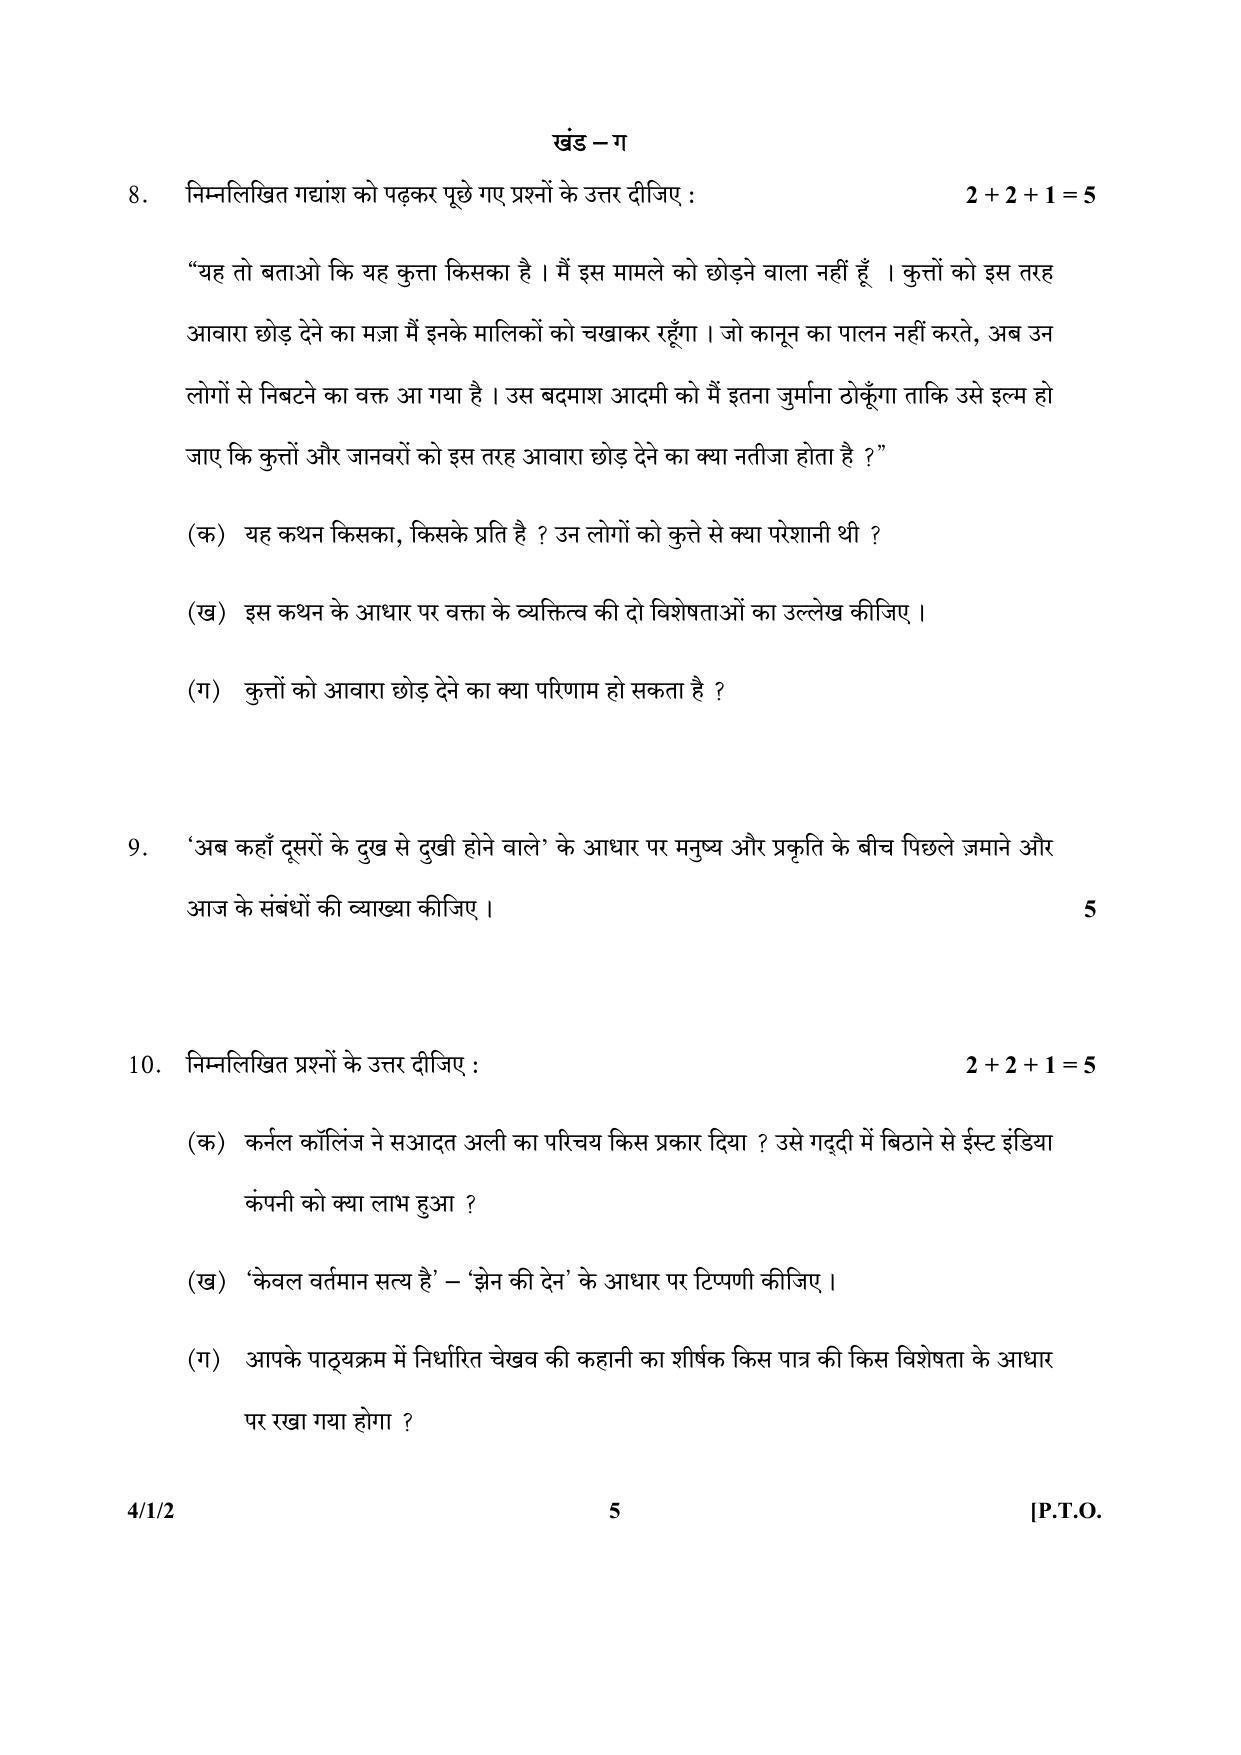 CBSE Class 10 4-1-2_Hindi 2017-comptt Question Paper - Page 5